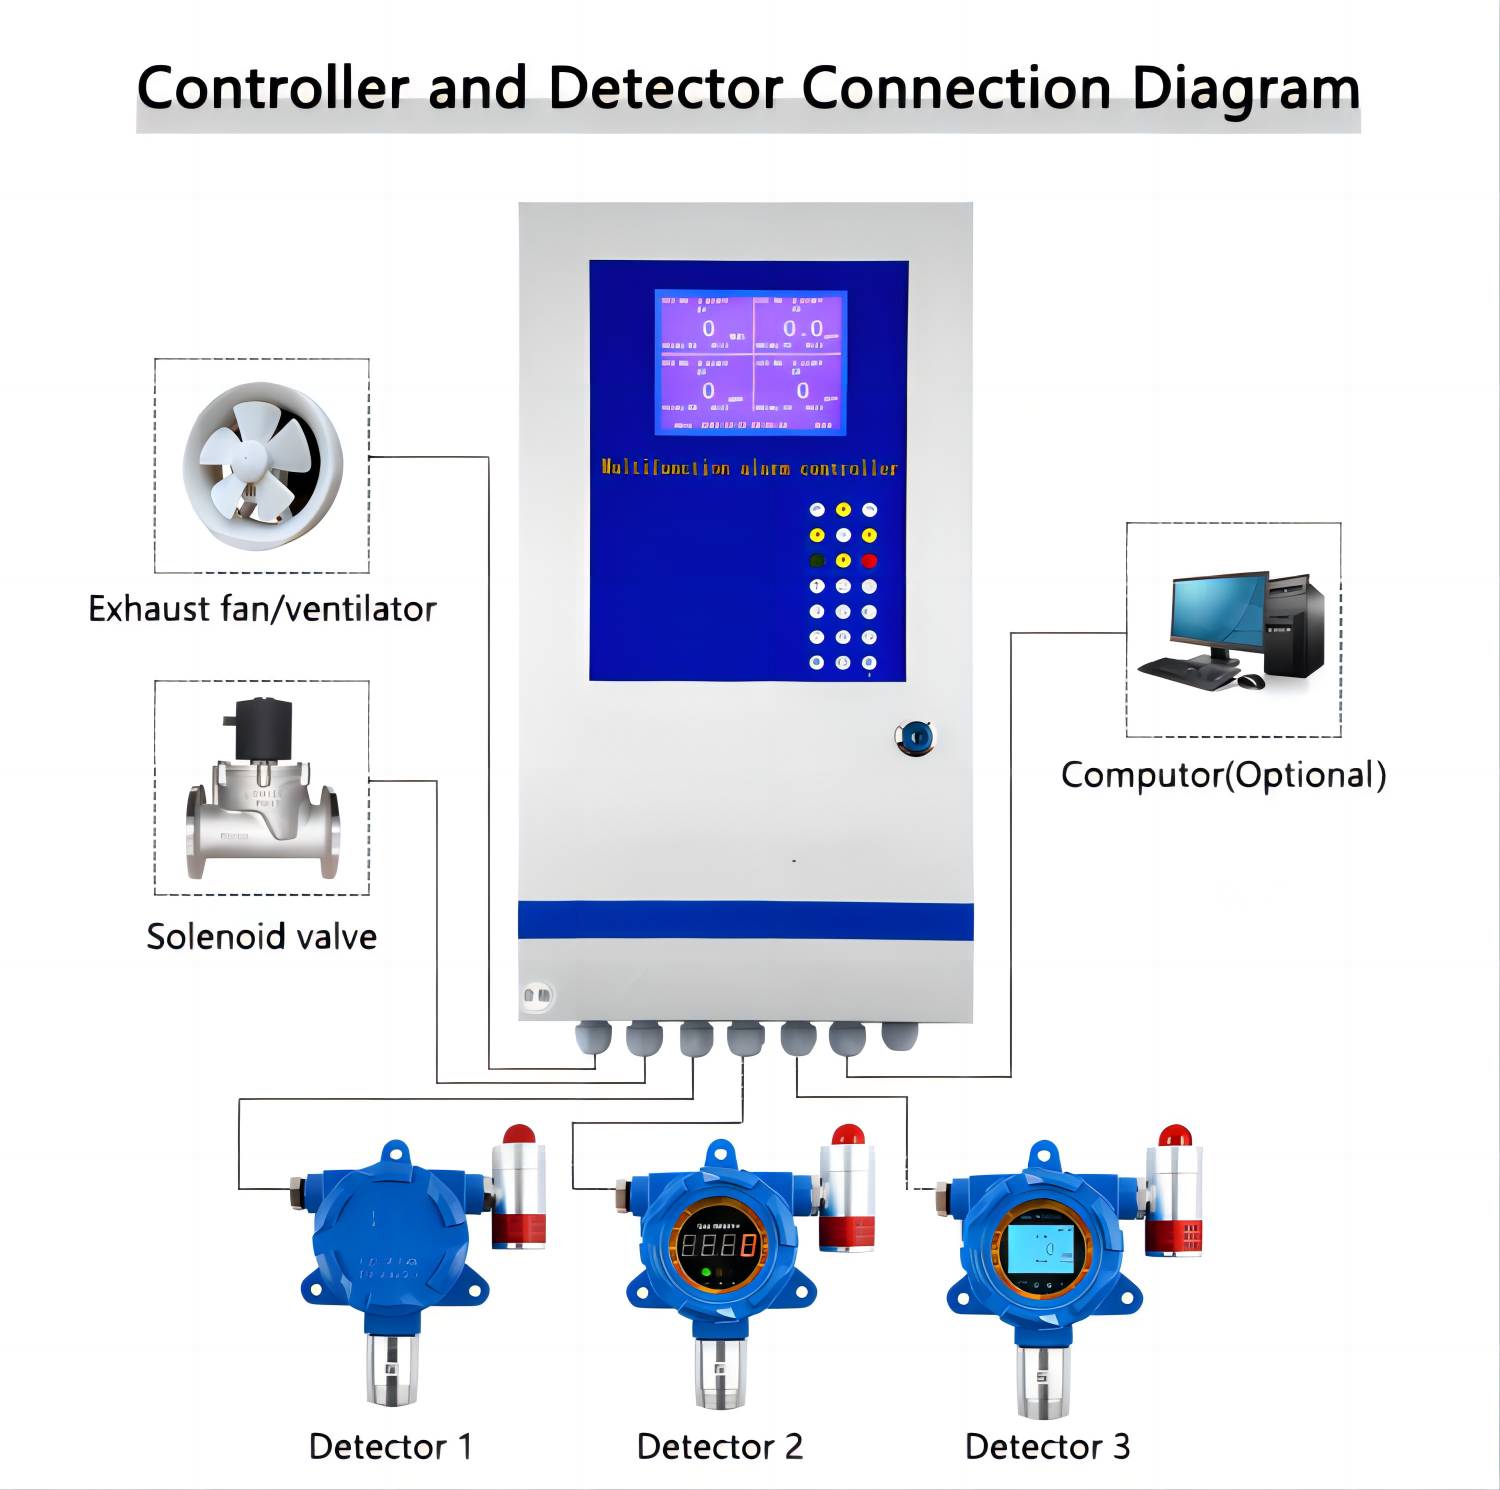 Controller and Detector Connection Diagram